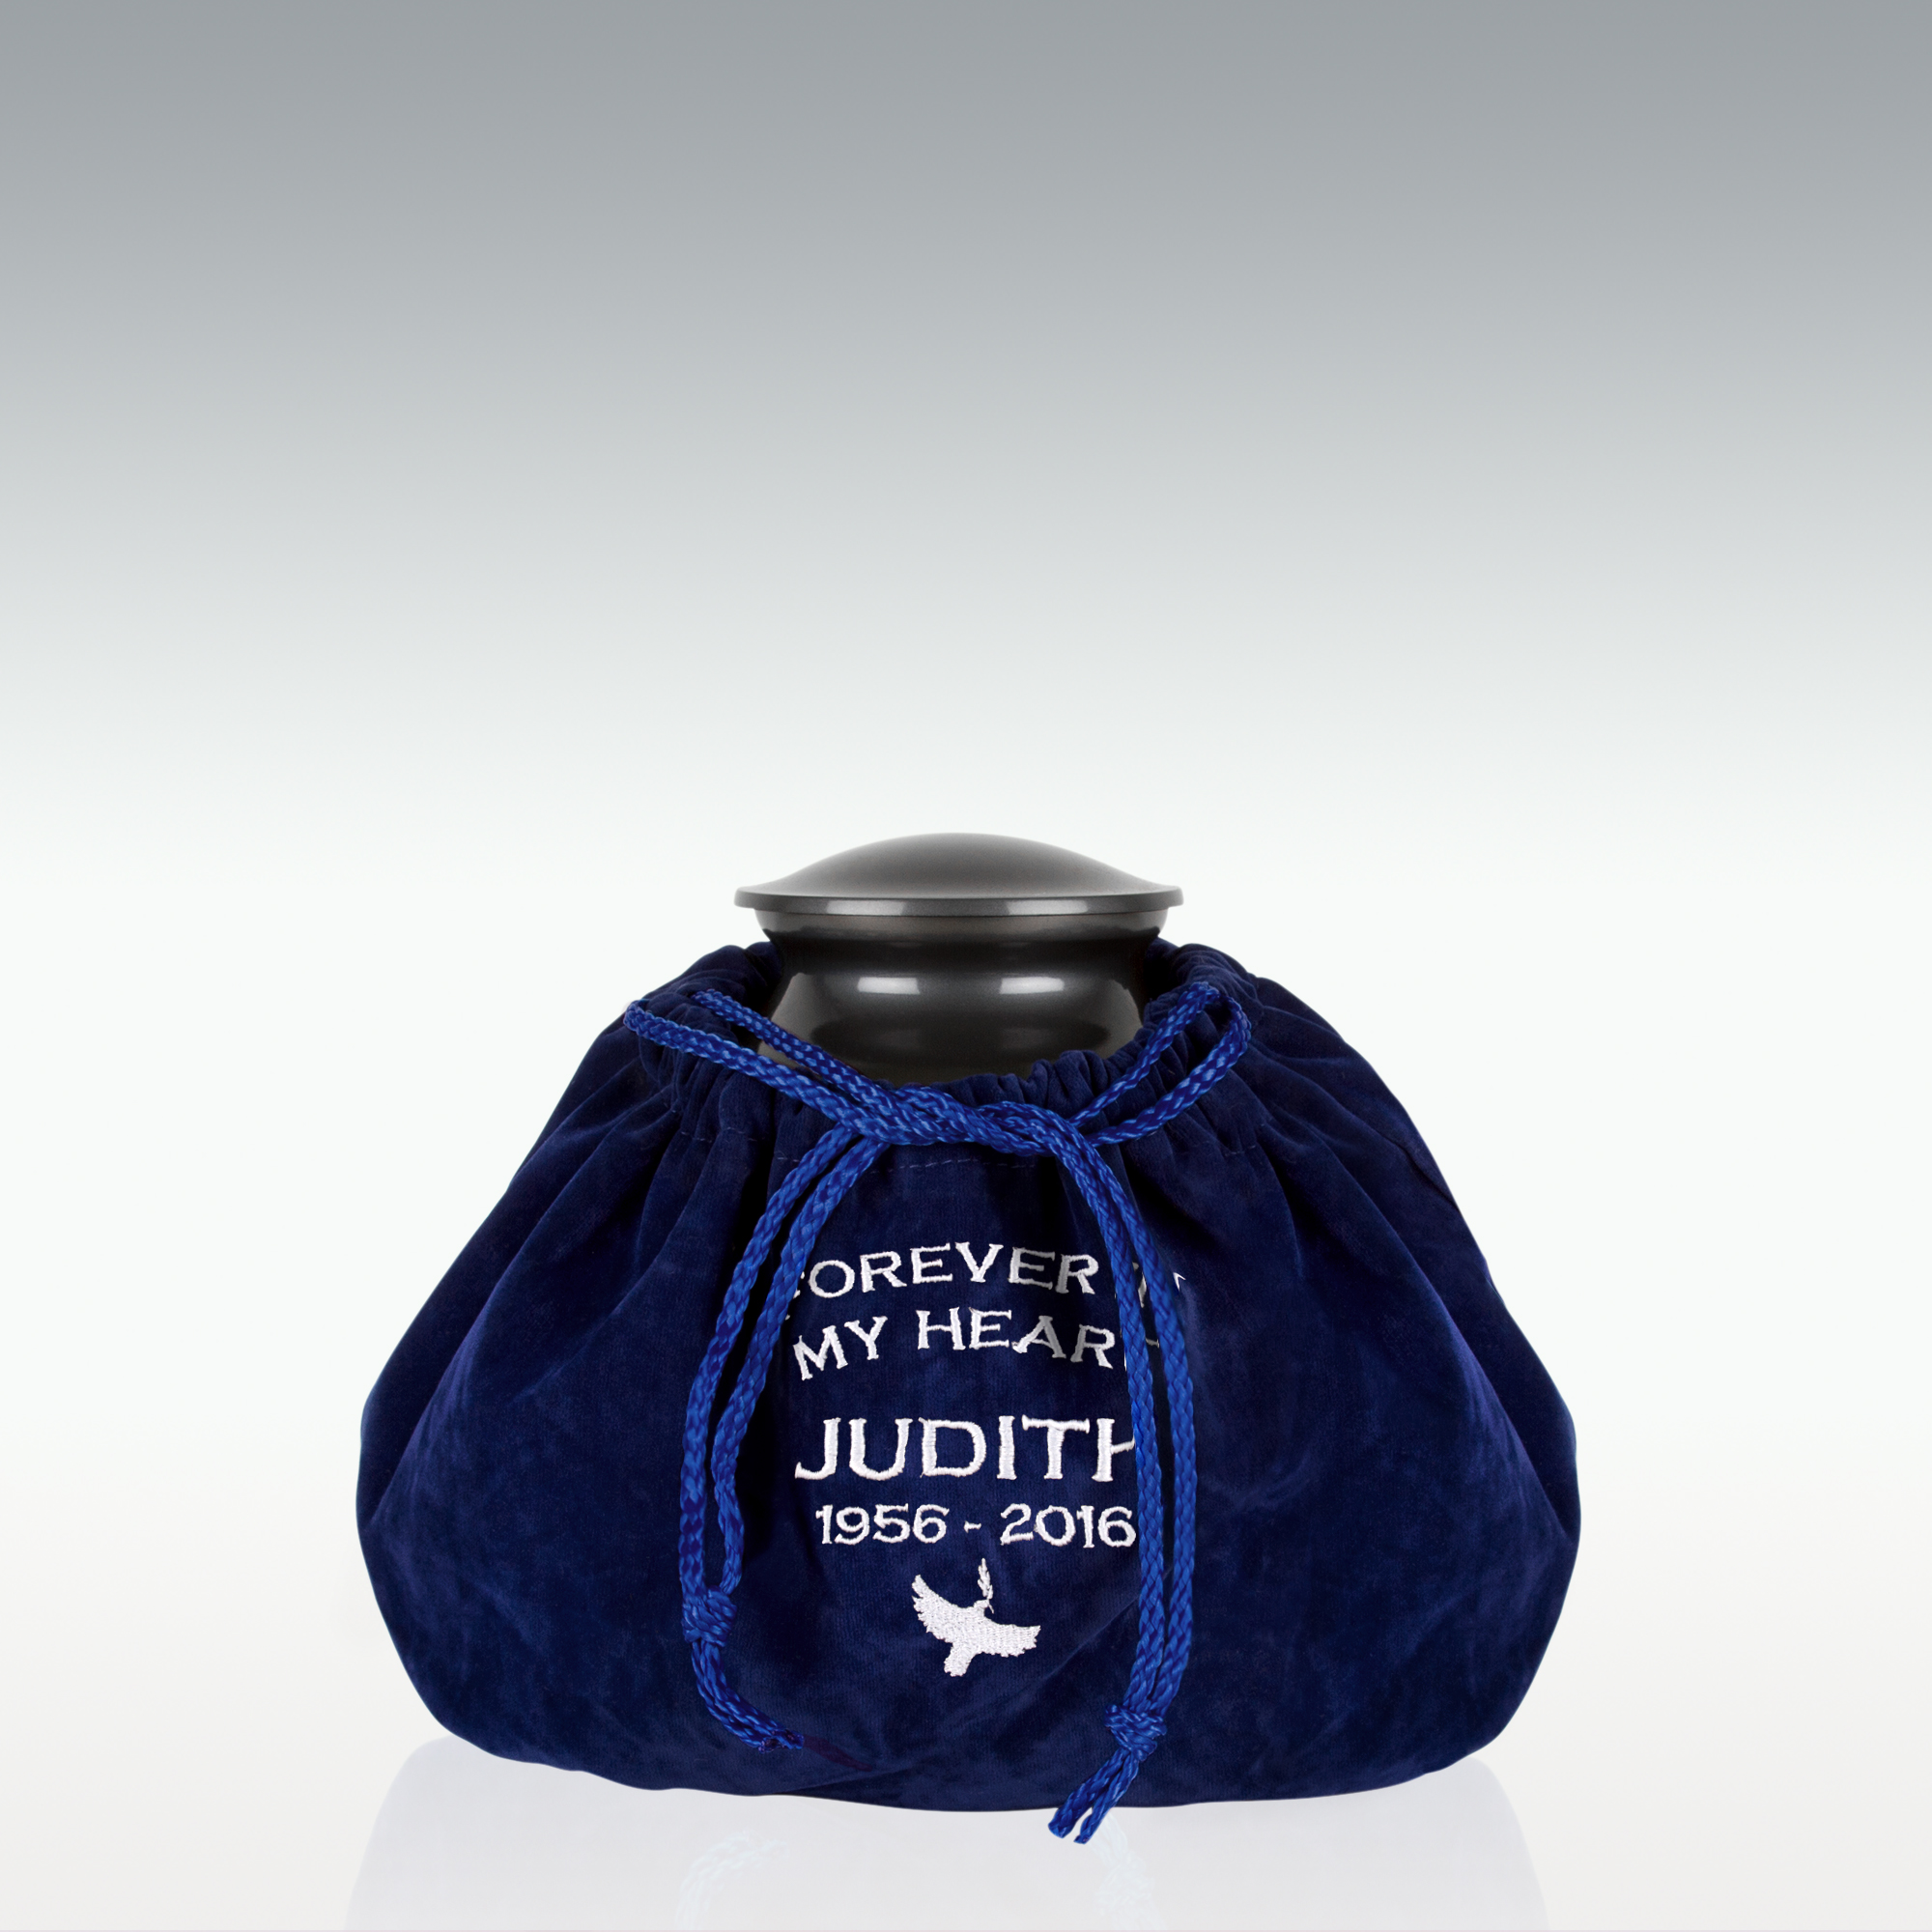 Buy Cremation Urn for Human Ashes with Satin Bag, for Adults up to 200 lbs  | Large Handcrafted Funeral Urns by Divit Shilp (Blue Mosaic New, Adult)  Online at Low Prices in